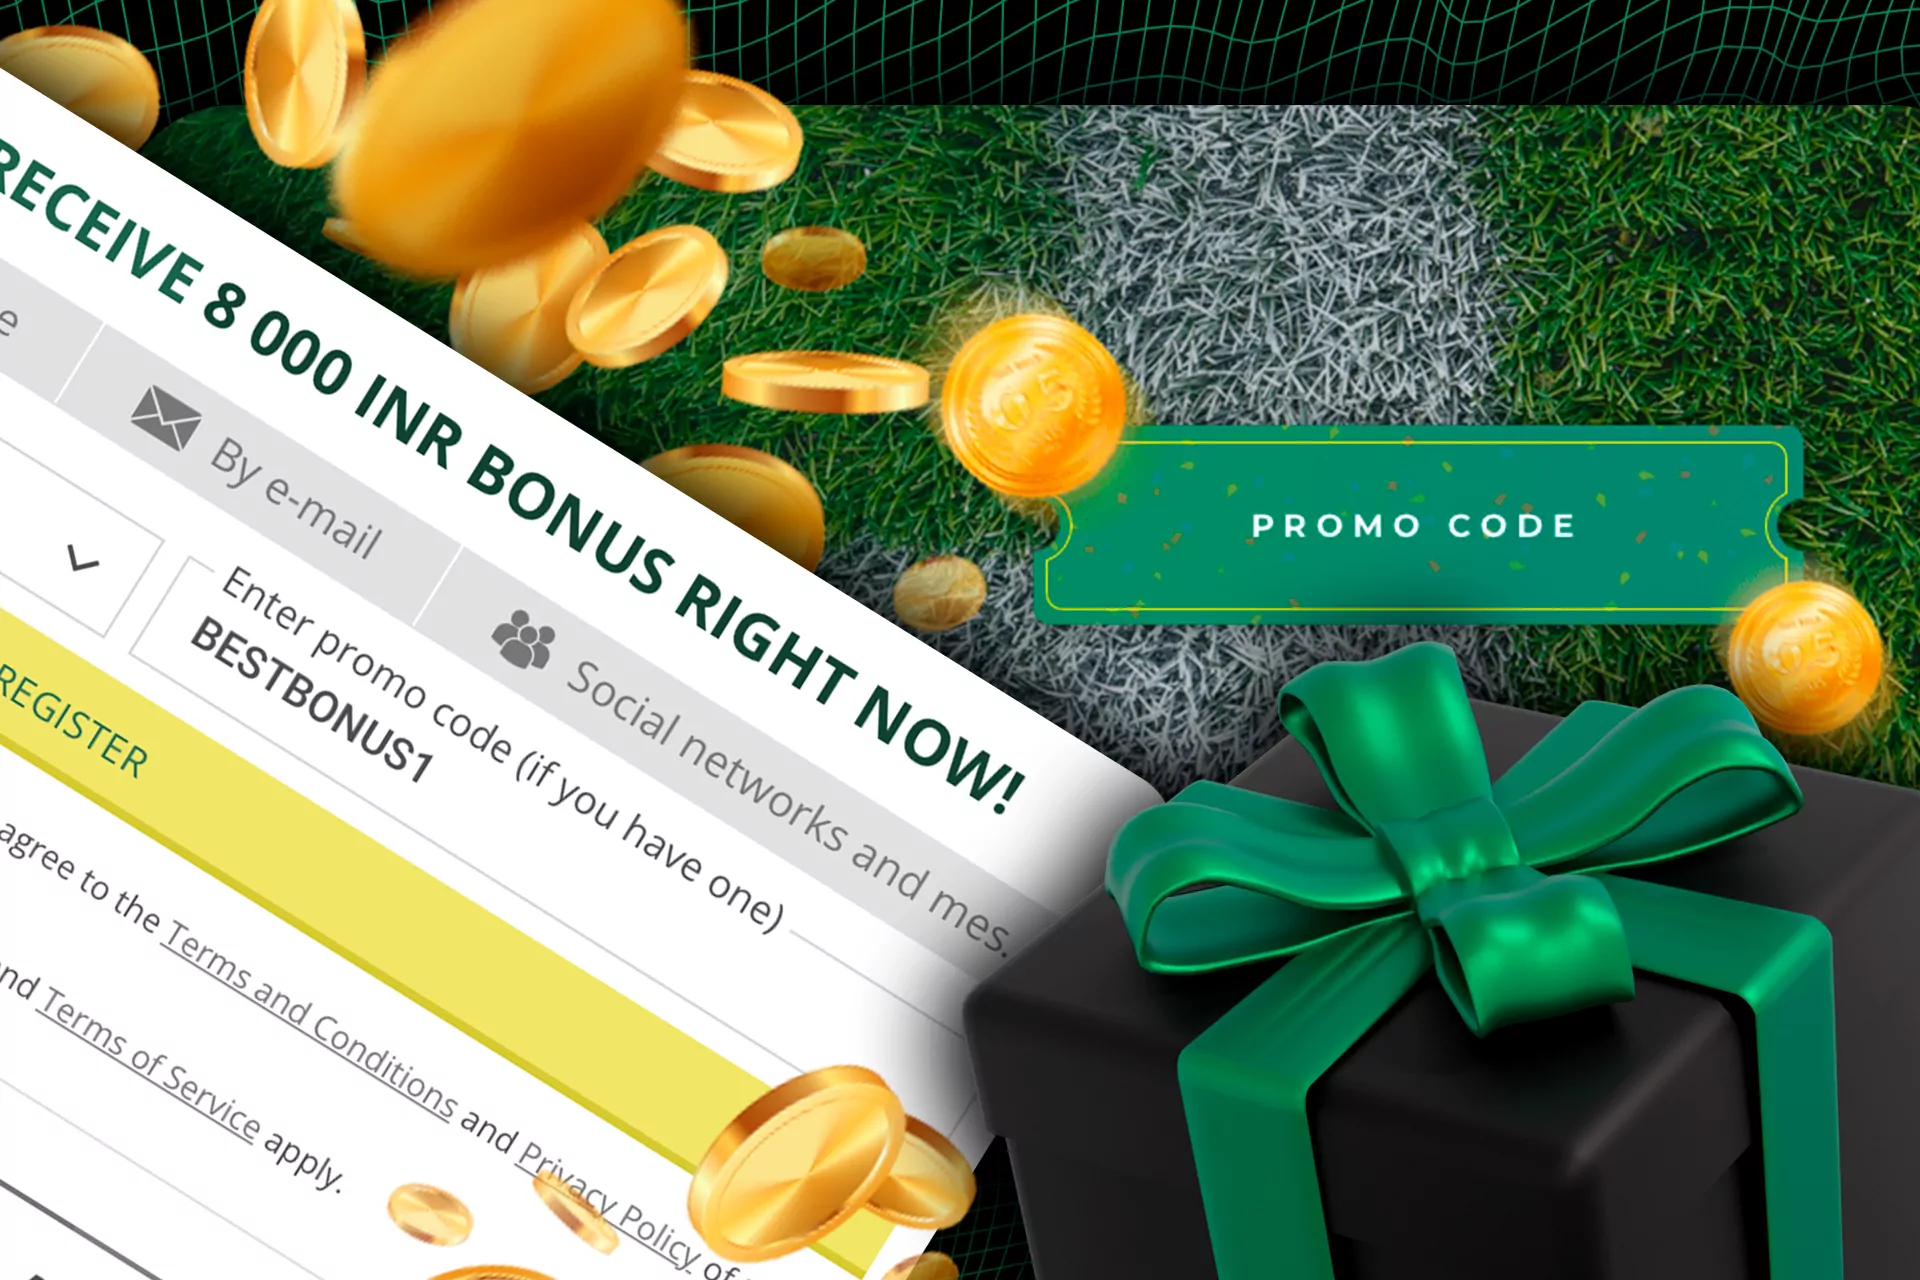 Our special promo code helps to get advanced options for betting at Betwinner.